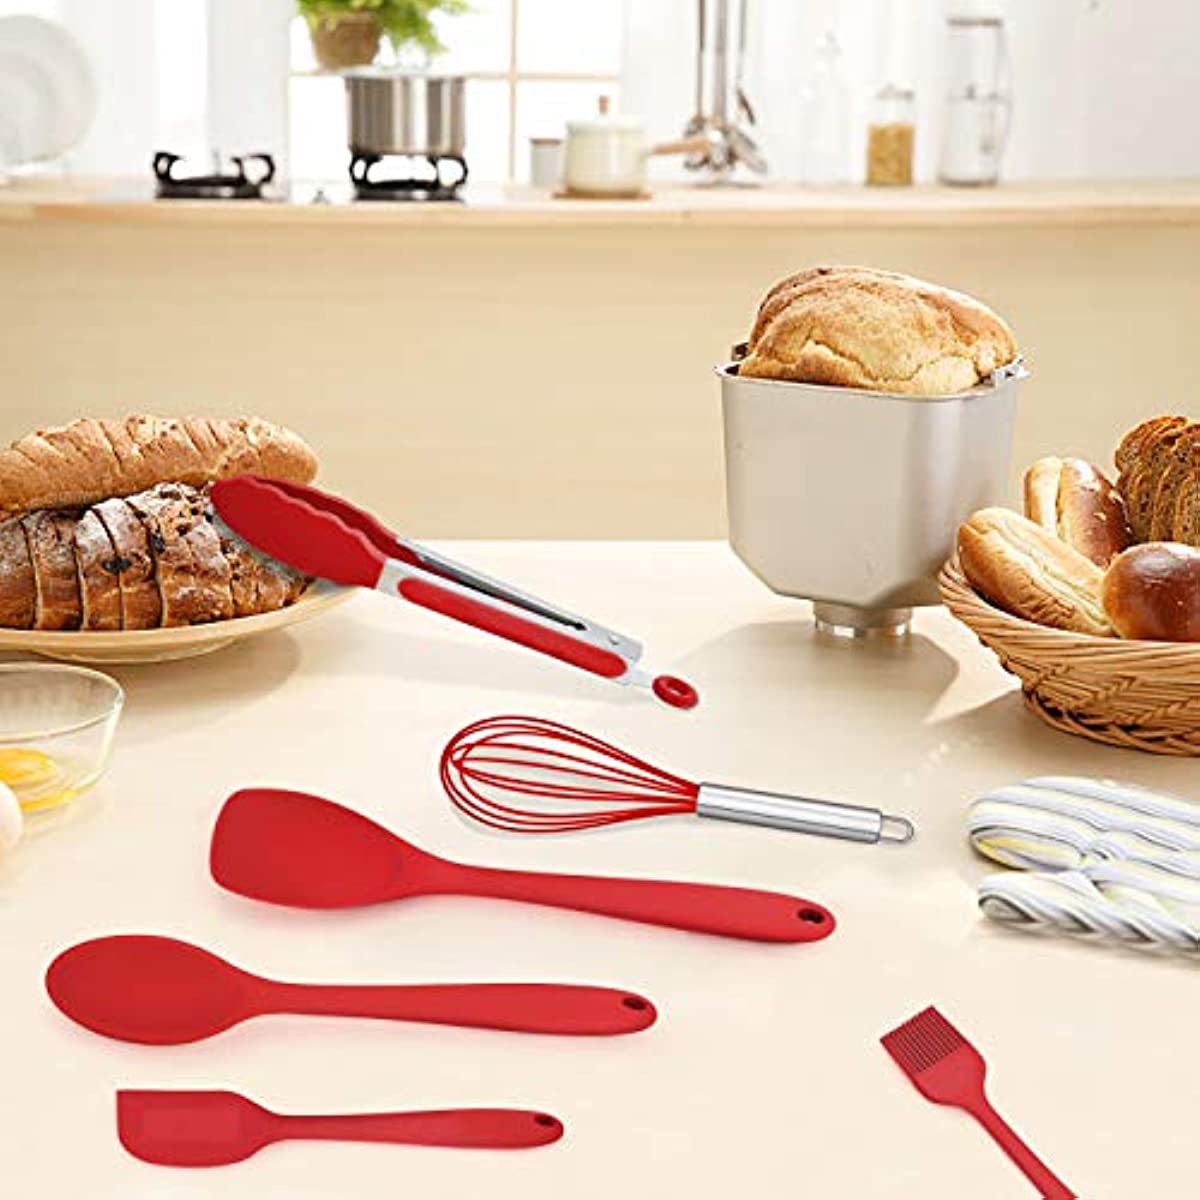 Silicone Utensil Set, Kitchen Utensil Set, Safety Cooking Utensils Set With  Holder, Non-stick Kitchen Cooking Turner, Spatula, Cooking Soup Spoon,  Colander Spoon, Whisk, Pasta Spoon, Tongs, Oil Brush, Cream Spetula, Kitchen  Stuff 